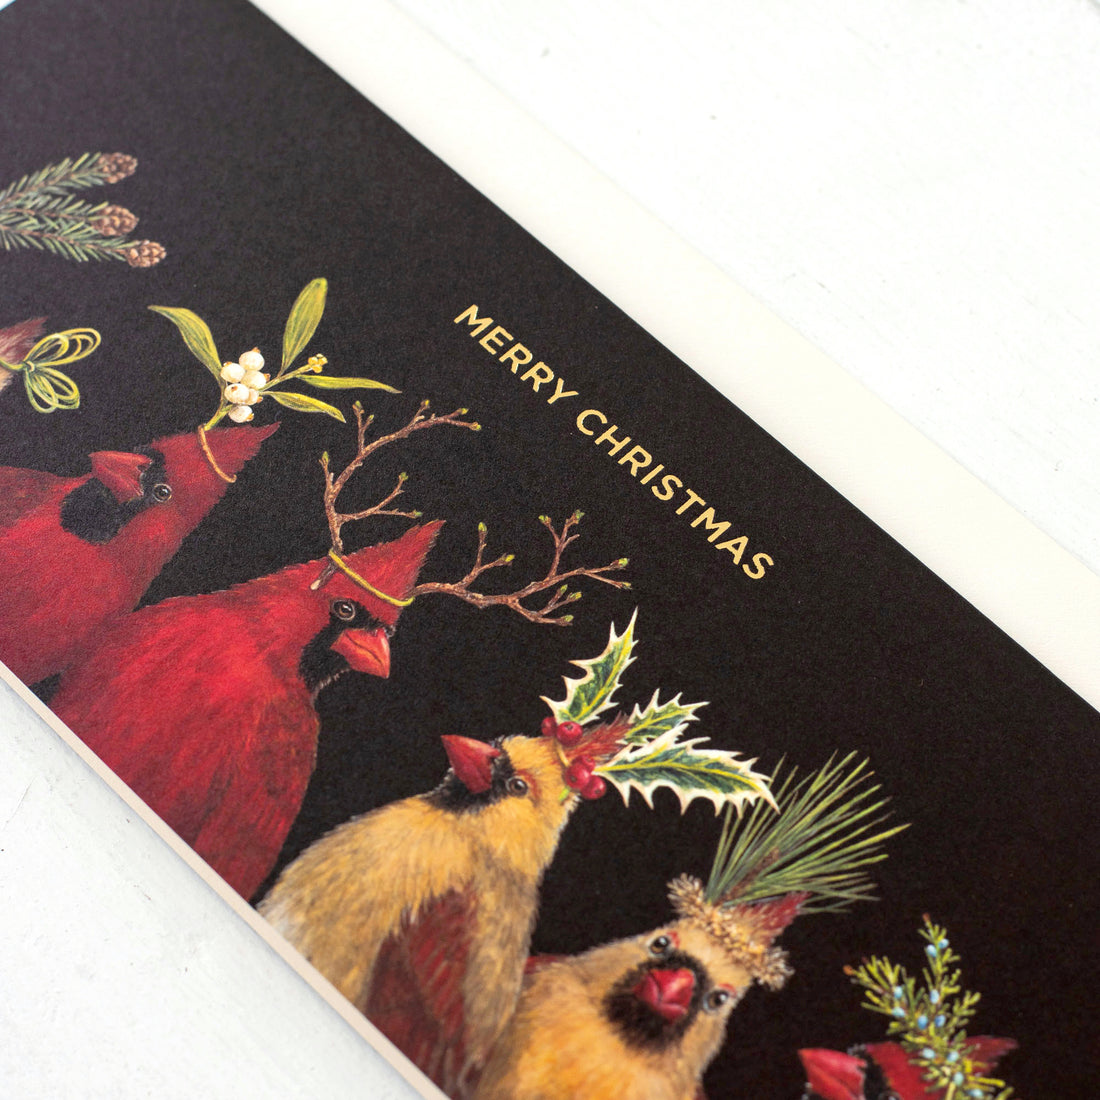 A festive Christmas card featuring a row of illustrated red cardinals with various plants and decorations on their heads, against a dark background, designed by Vicki Sawyer, with the greeting &quot;merry christmas&quot; is the Christmas Cardinals Boxed Set Cards from Hester &amp; Cook.